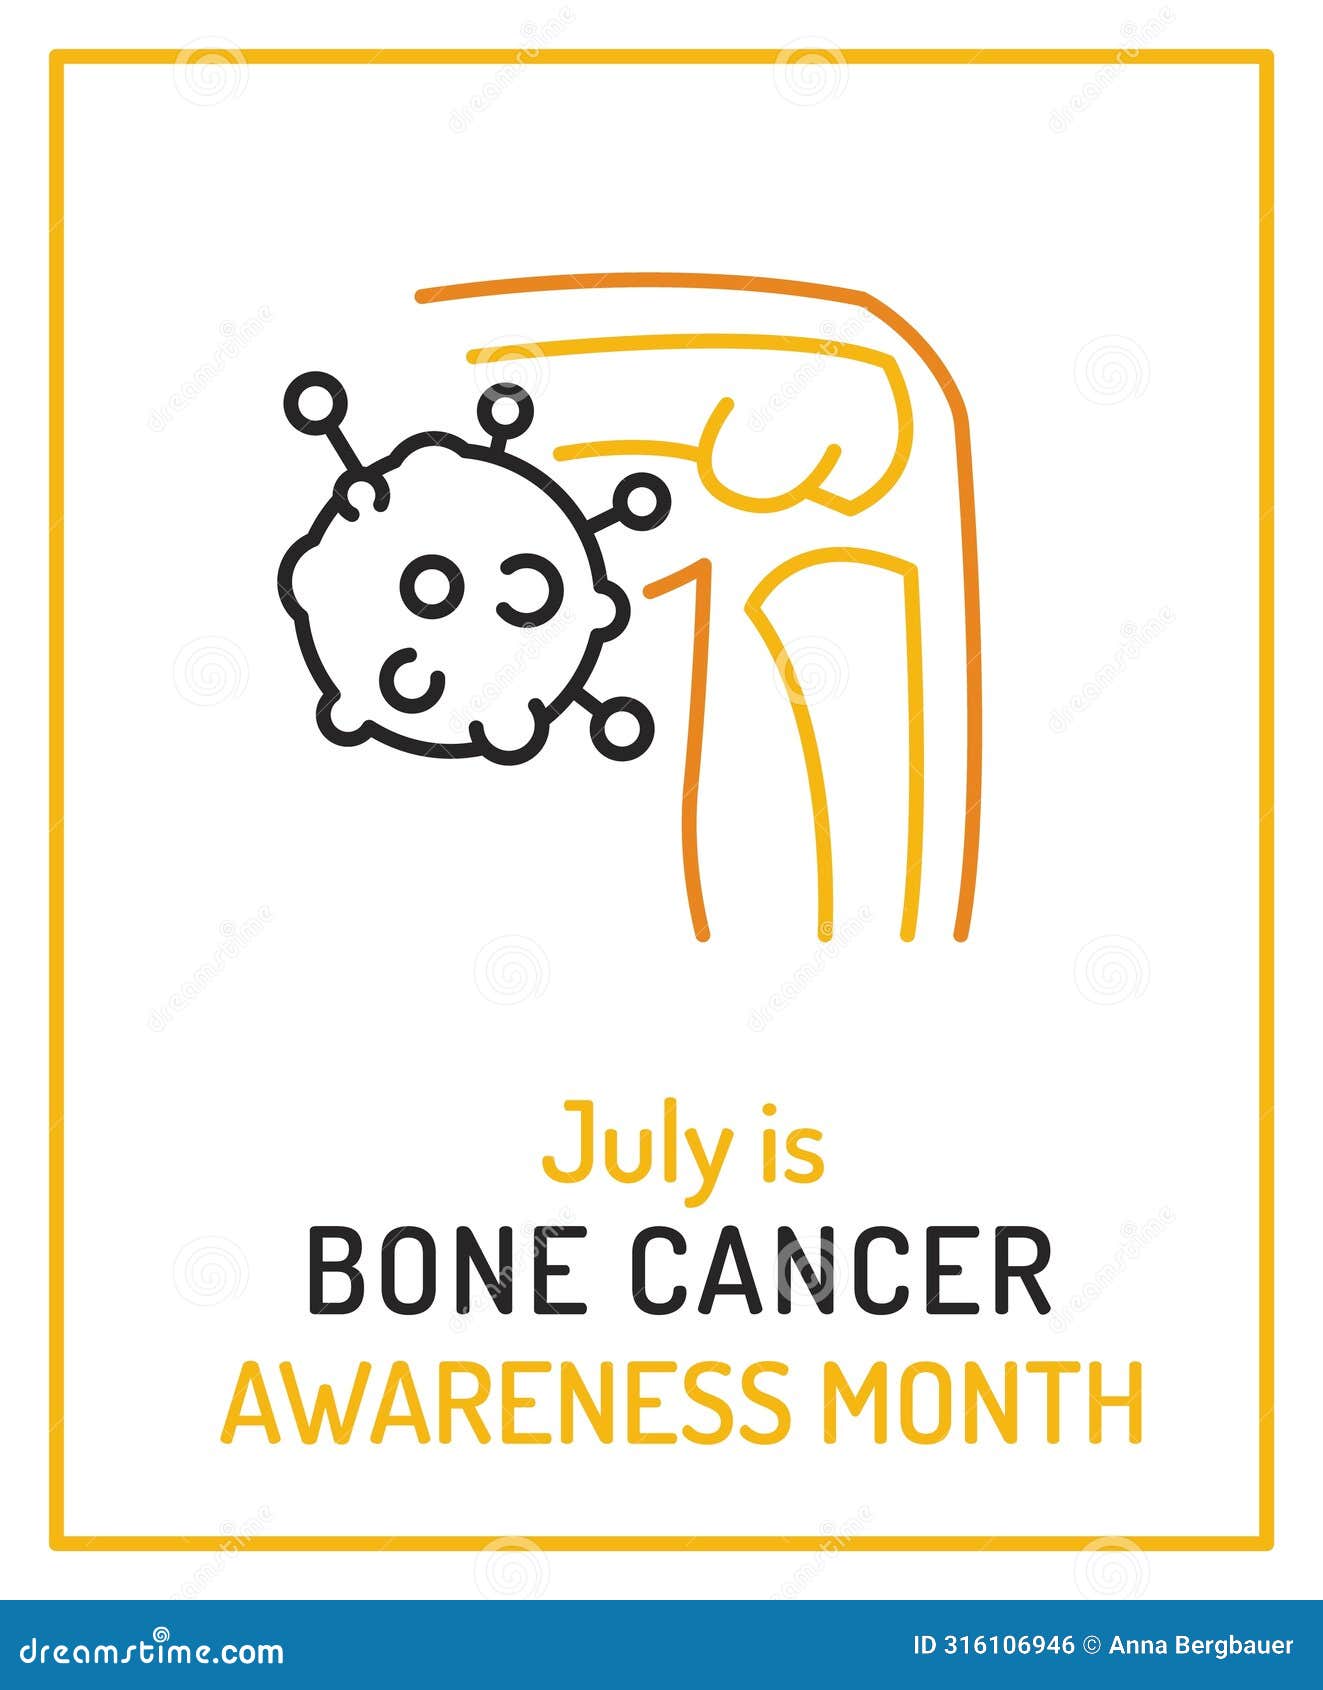 sarcoma and bone cancer awareness month in july.